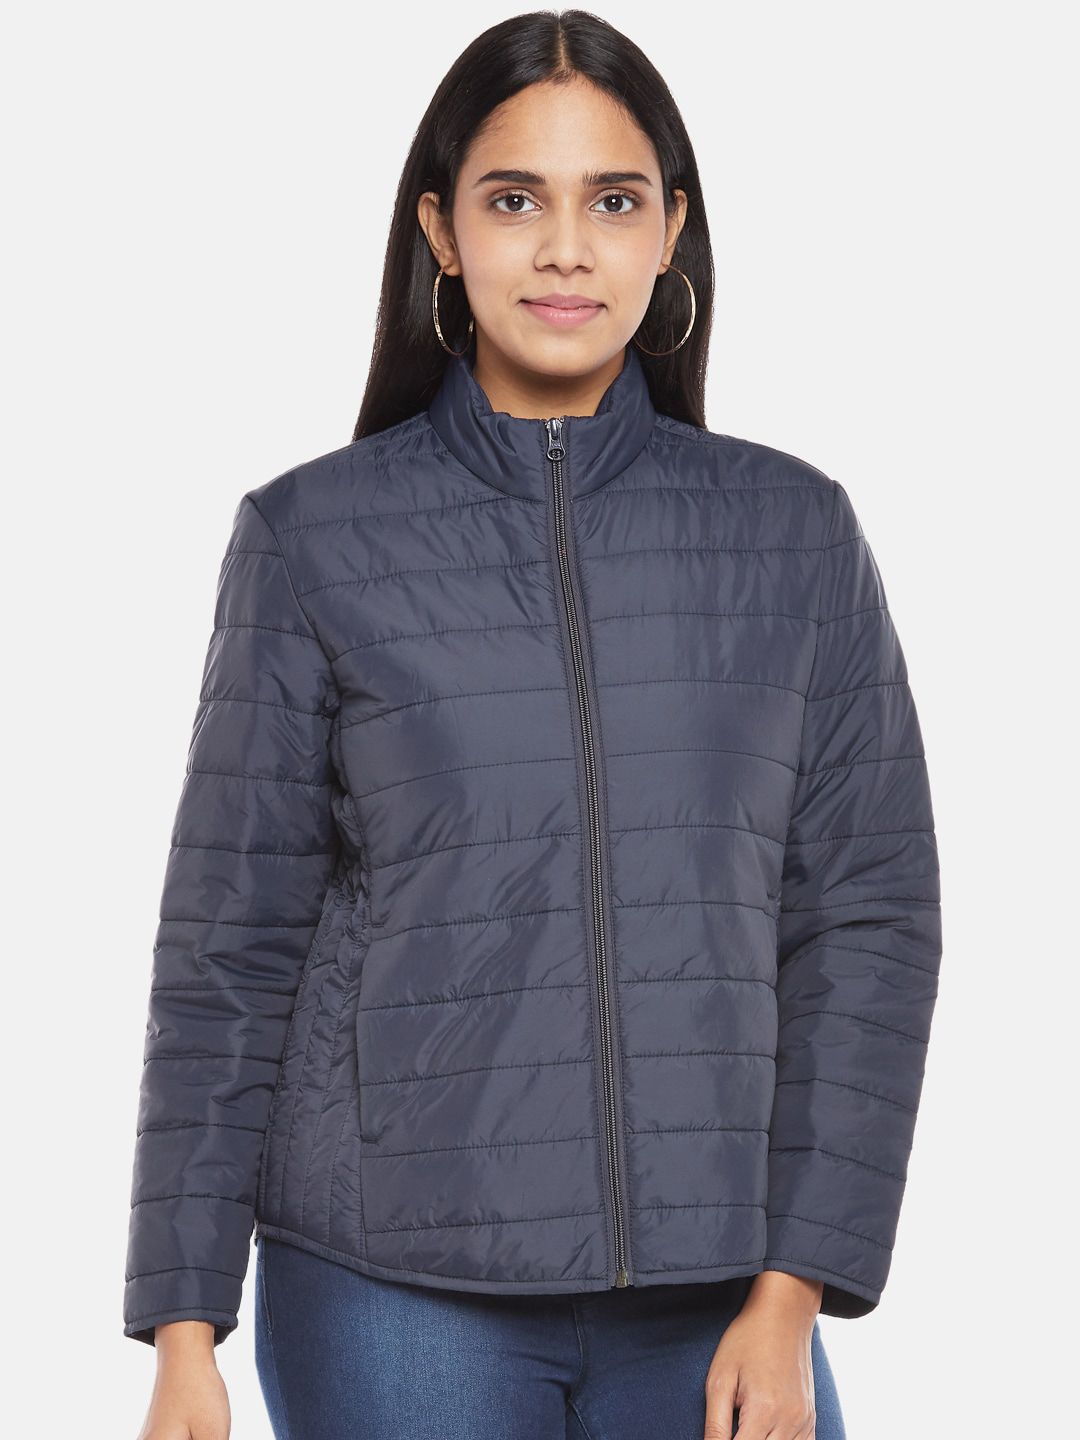 Honey by Pantaloons Women Navy Blue Quilted Jacket Price in India